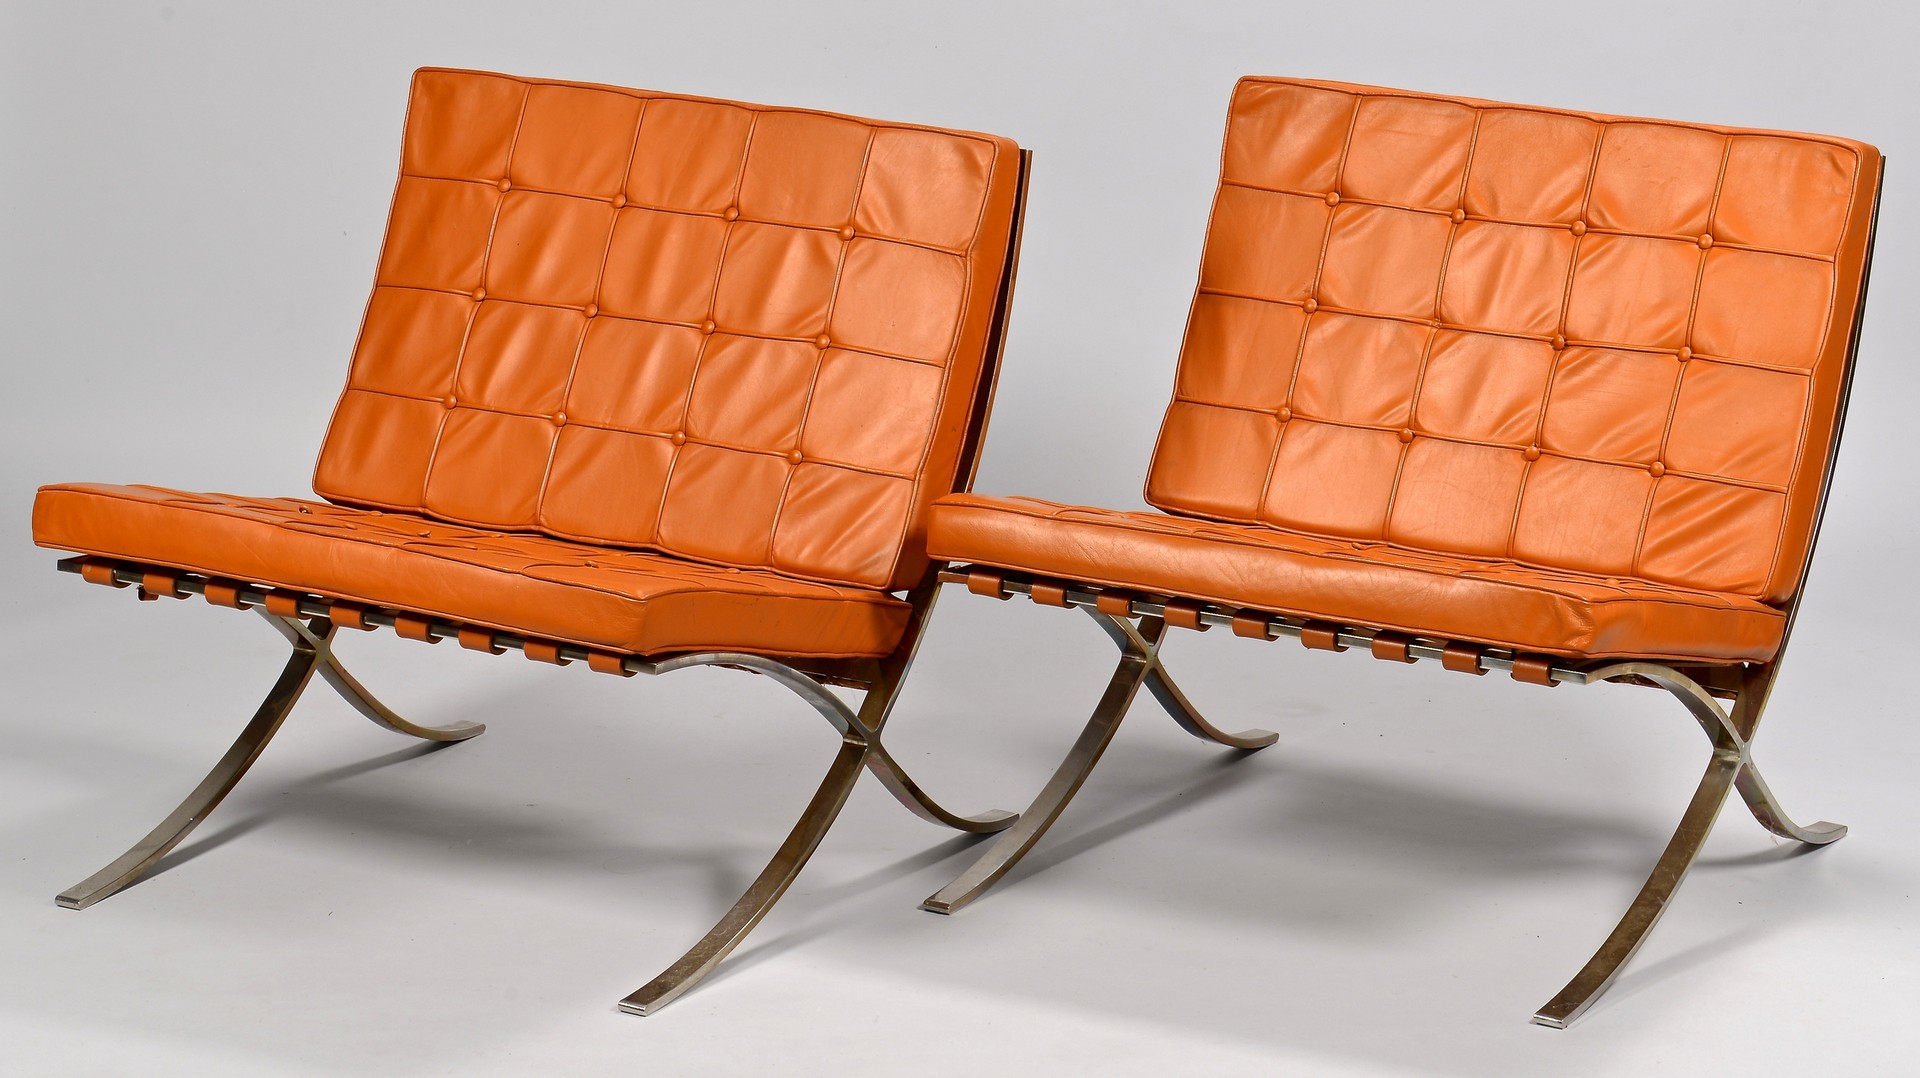 Lot 445: Pair of "Barcelona" Style Chairs